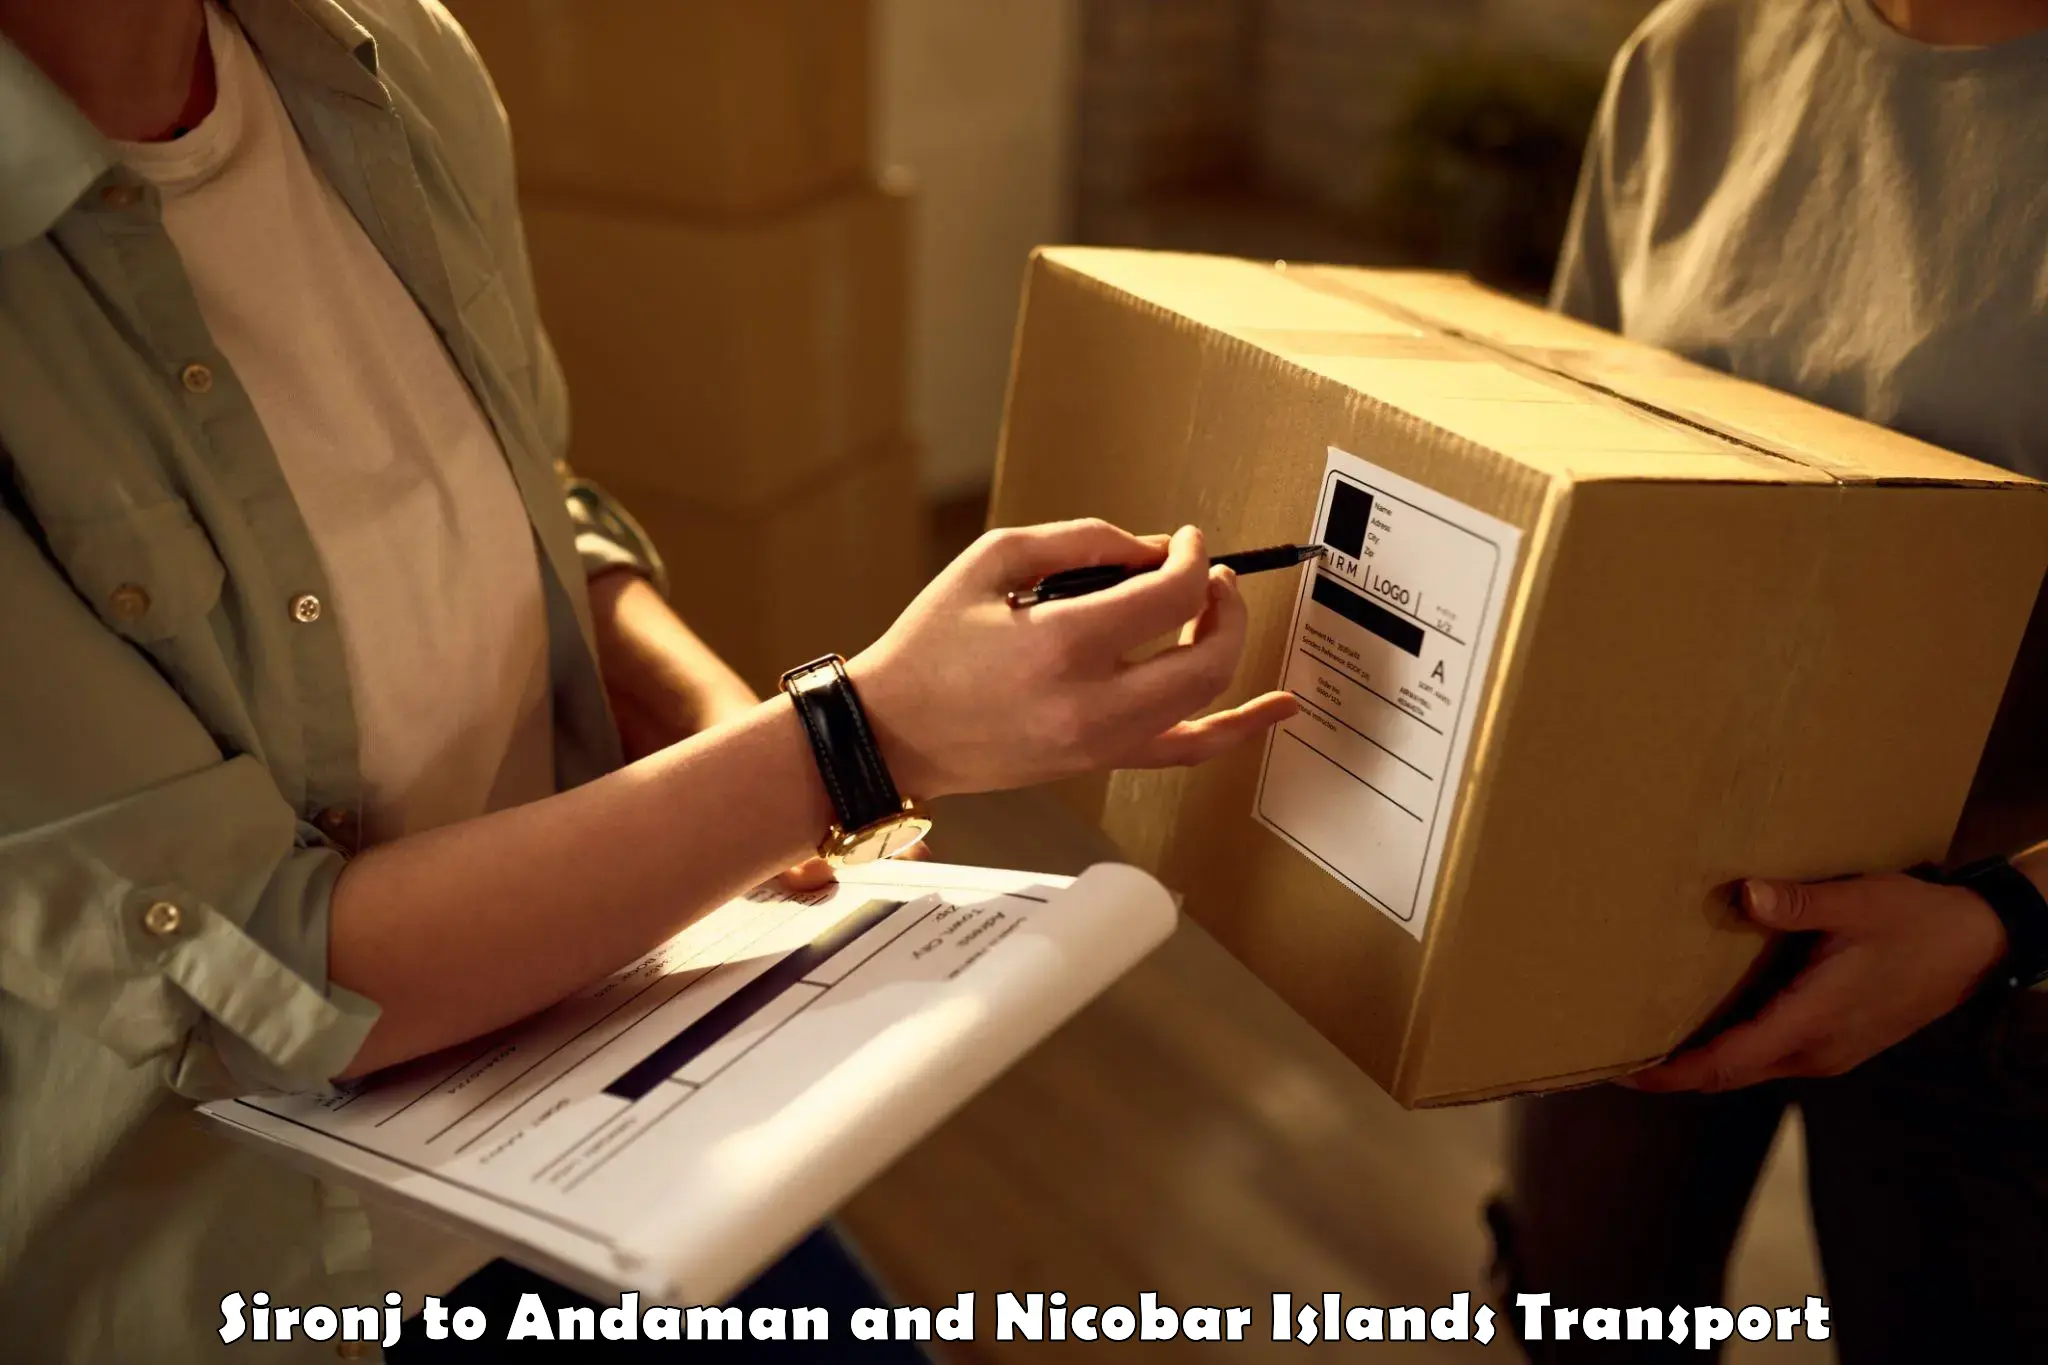 Daily parcel service transport Sironj to Andaman and Nicobar Islands